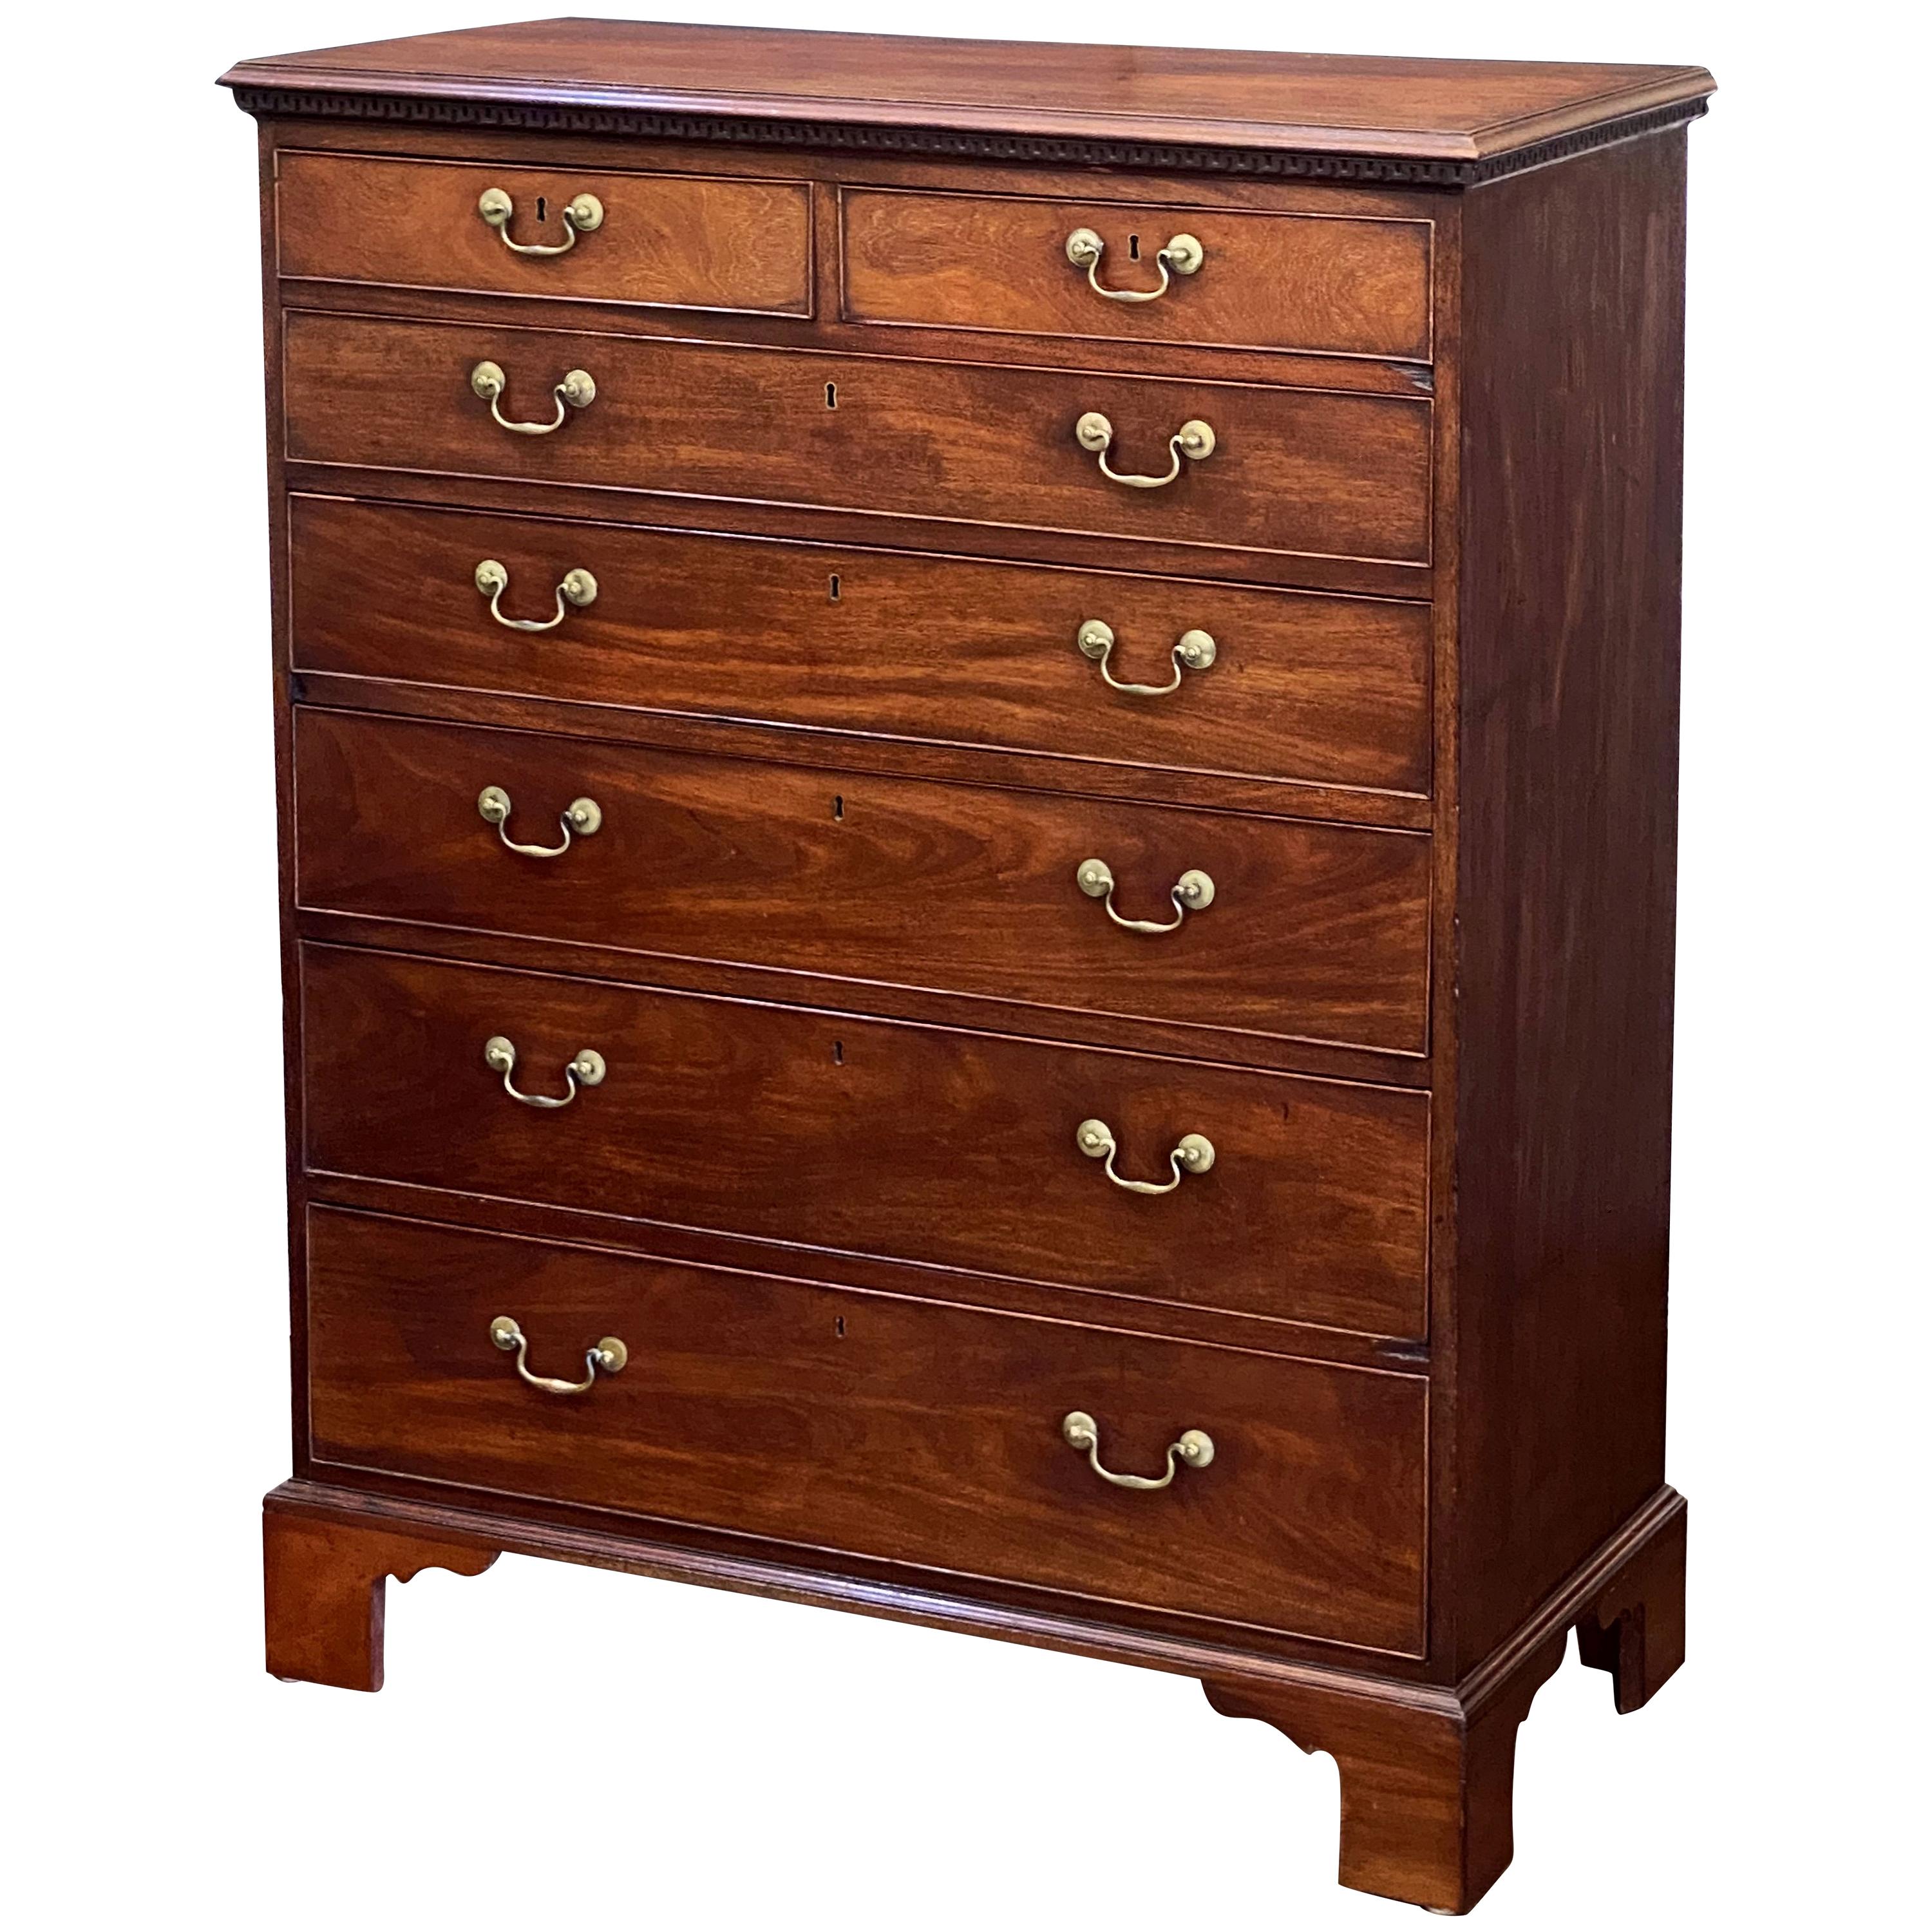 English Tall Chest or High Chest of Drawers from the Georgian Era